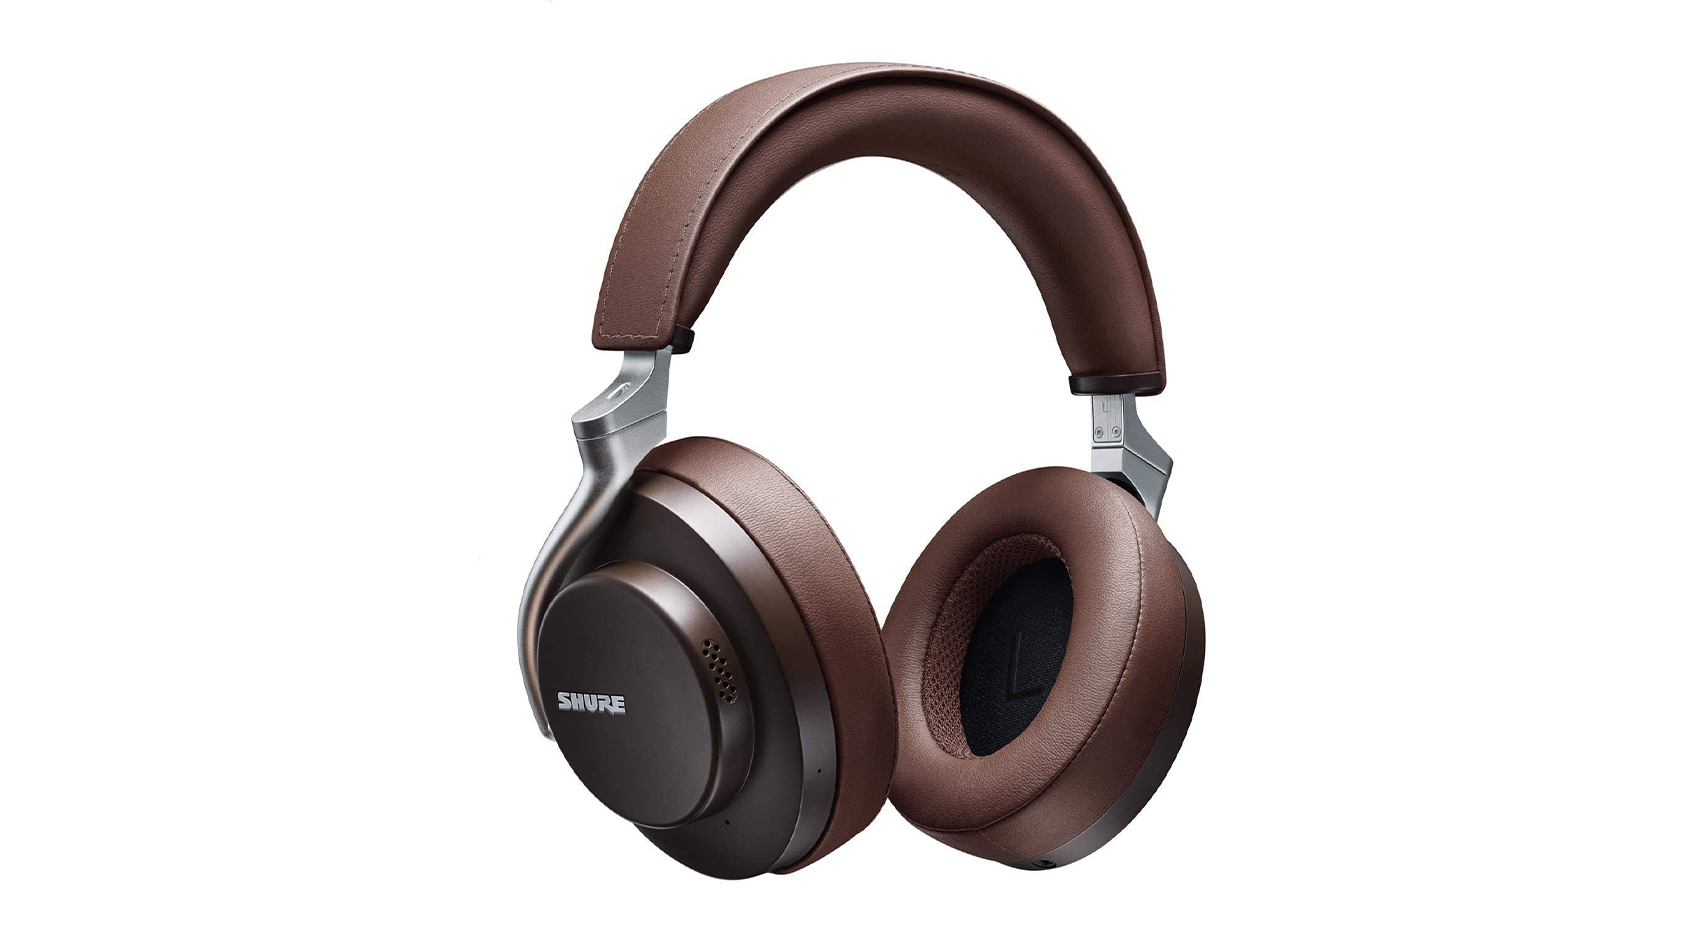 A product render of the Shure AONIC 50 noise canceling headphones in brown against a white background.